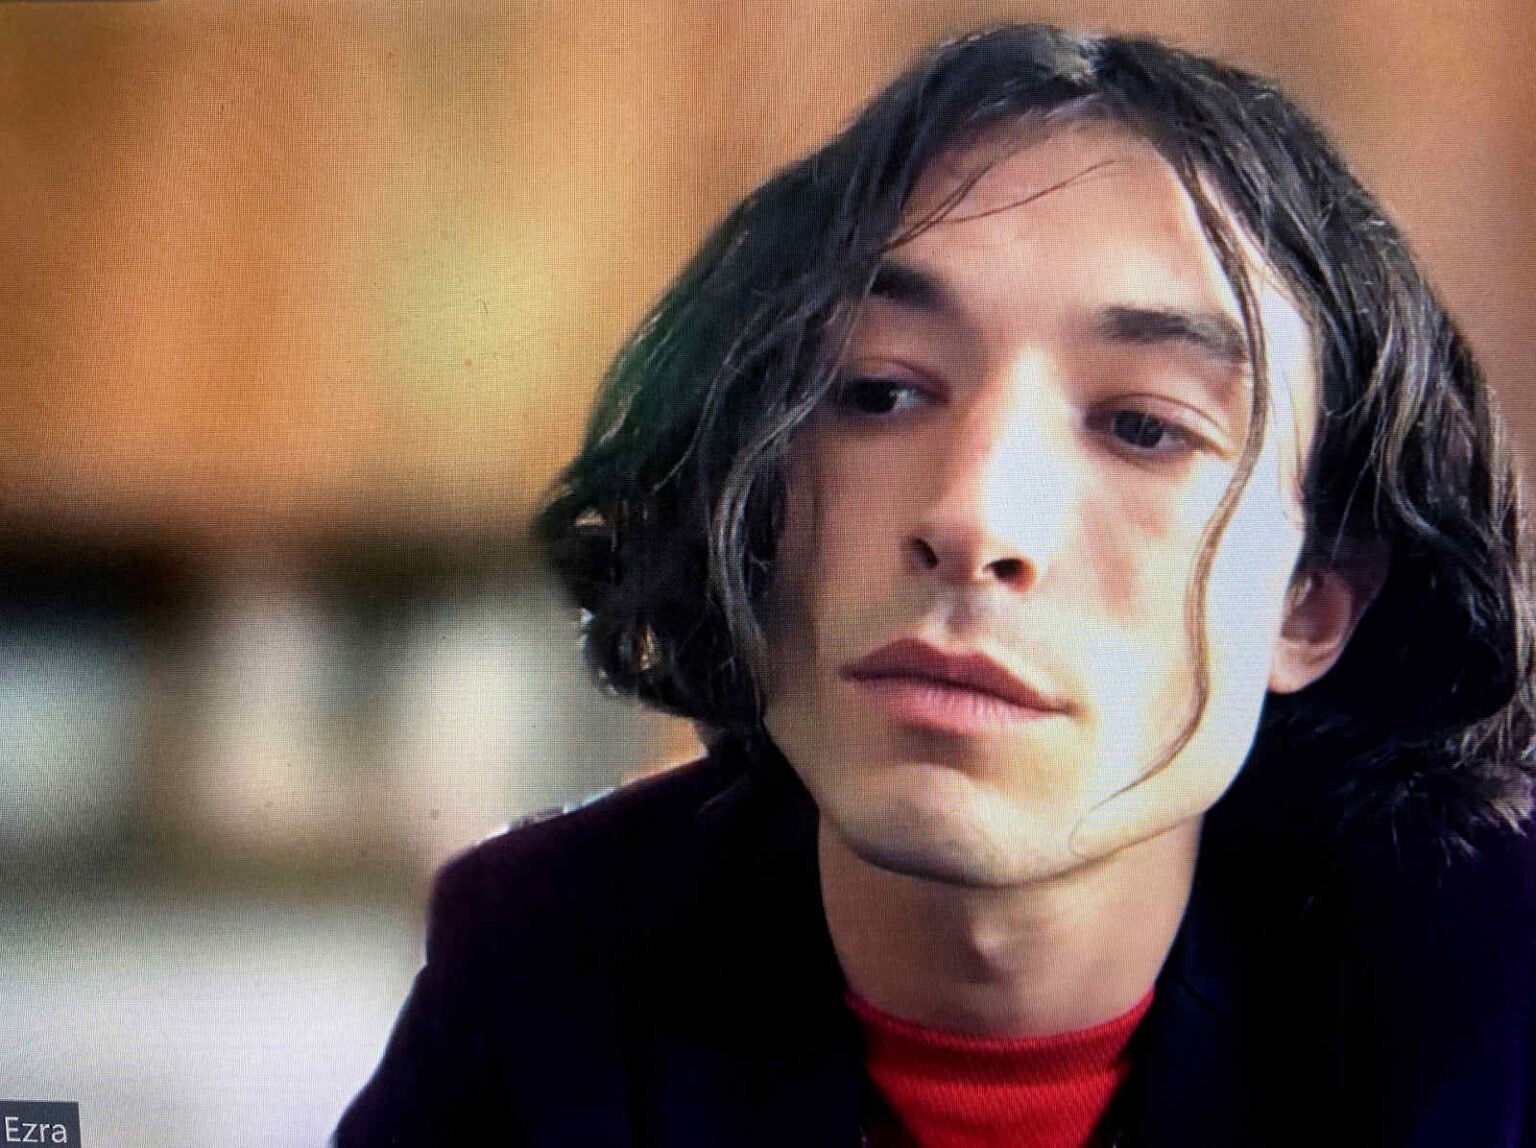 Is Miller’s performance an unforgettable tour de force? Take a look at the newest details around Ezra Miller's newest casting!